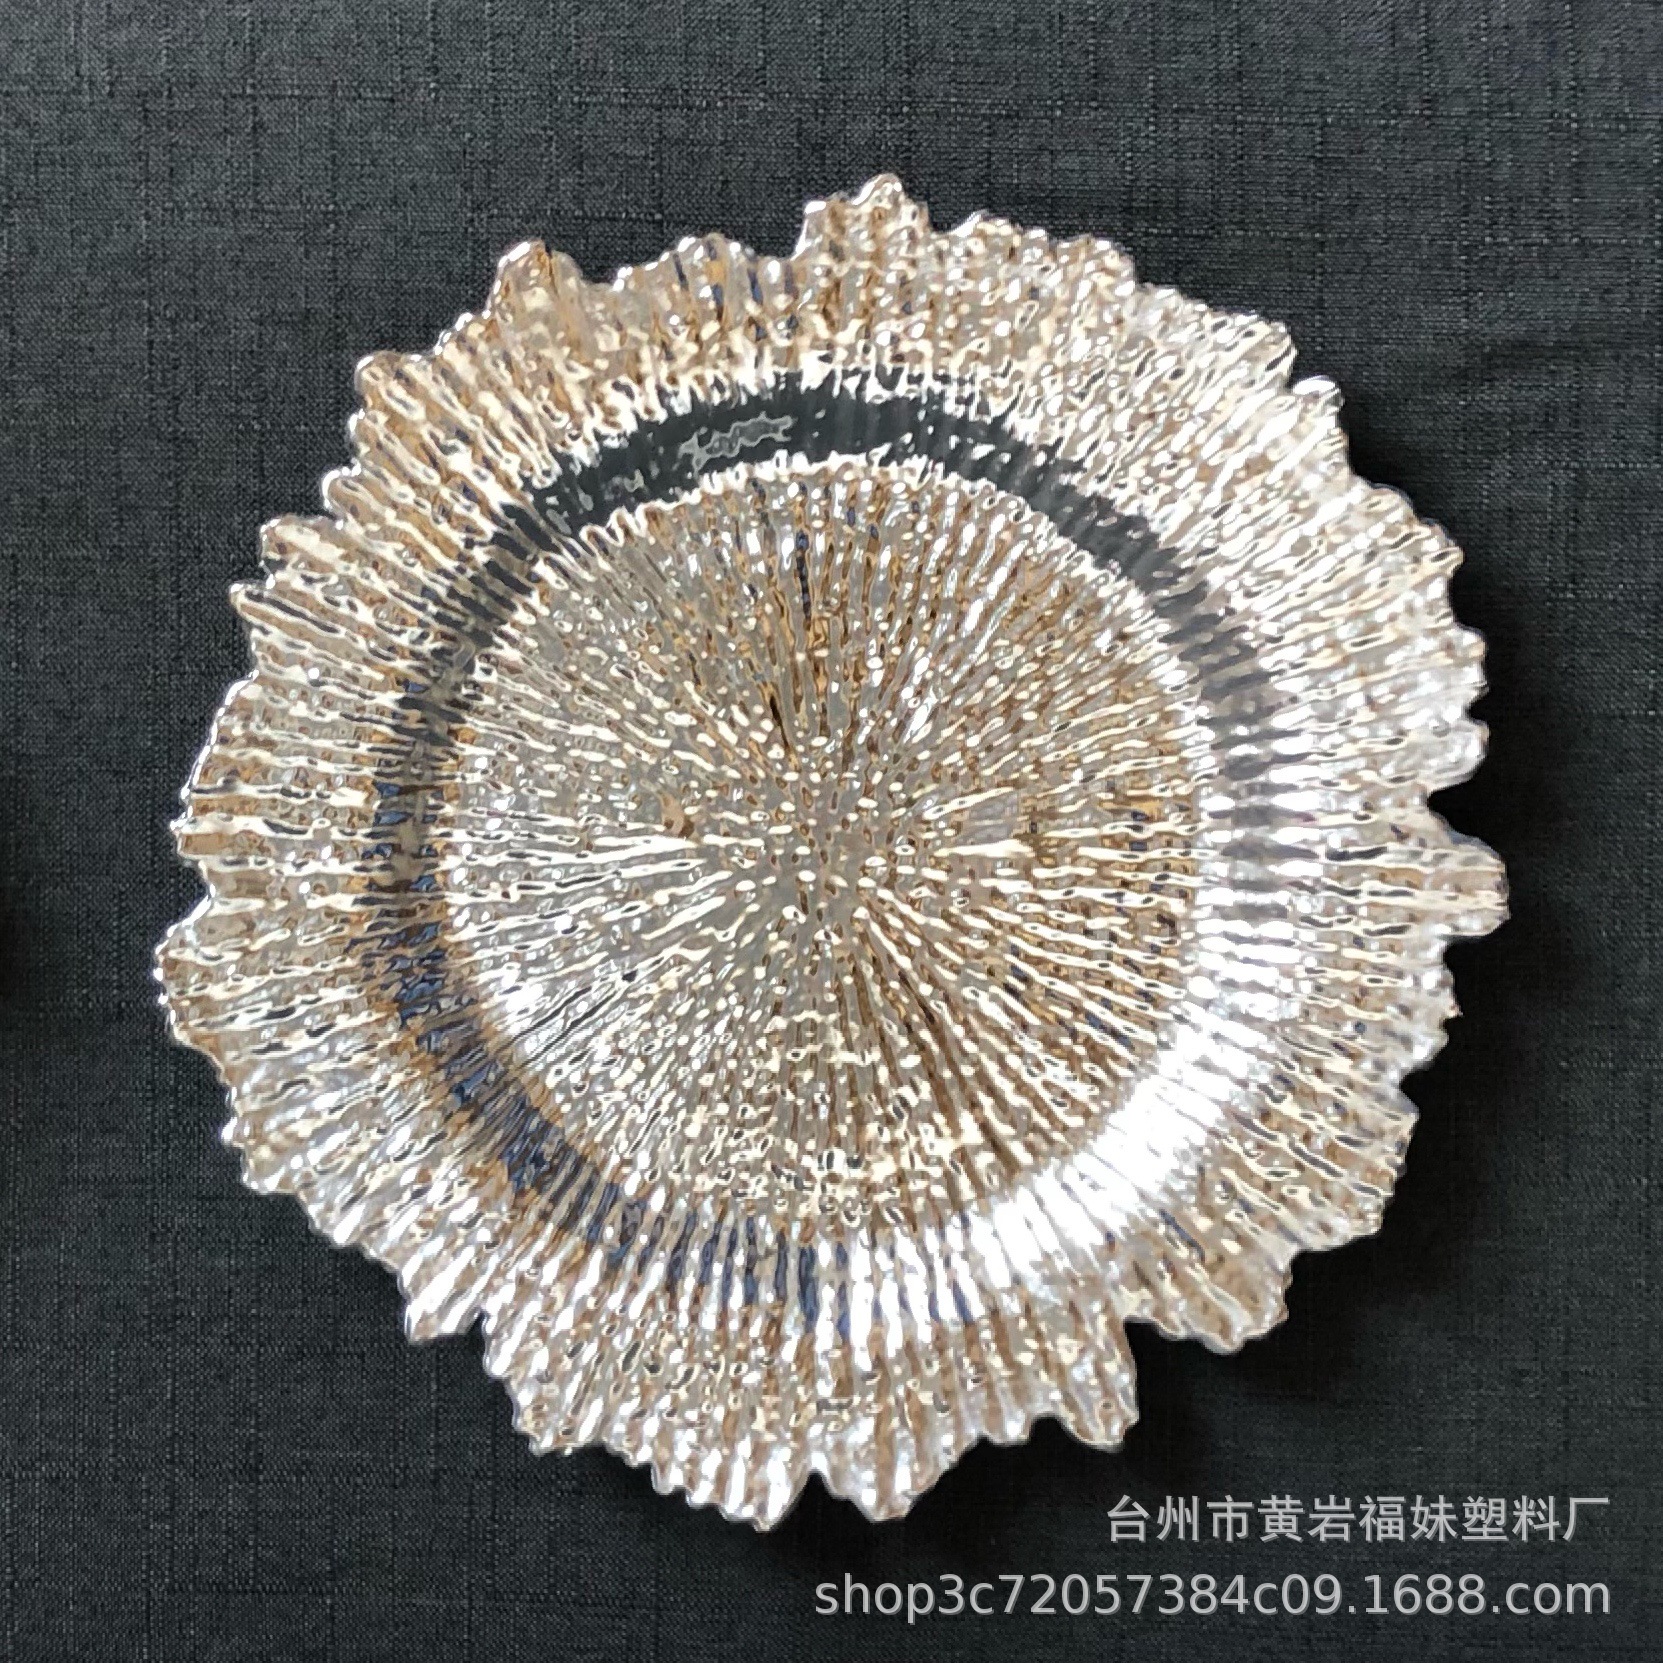 Trendy Irregular Fruit Plate Banquet Plate European-Style Household Decorative Tray Pastry Small Snack Dish Electroplated Gold